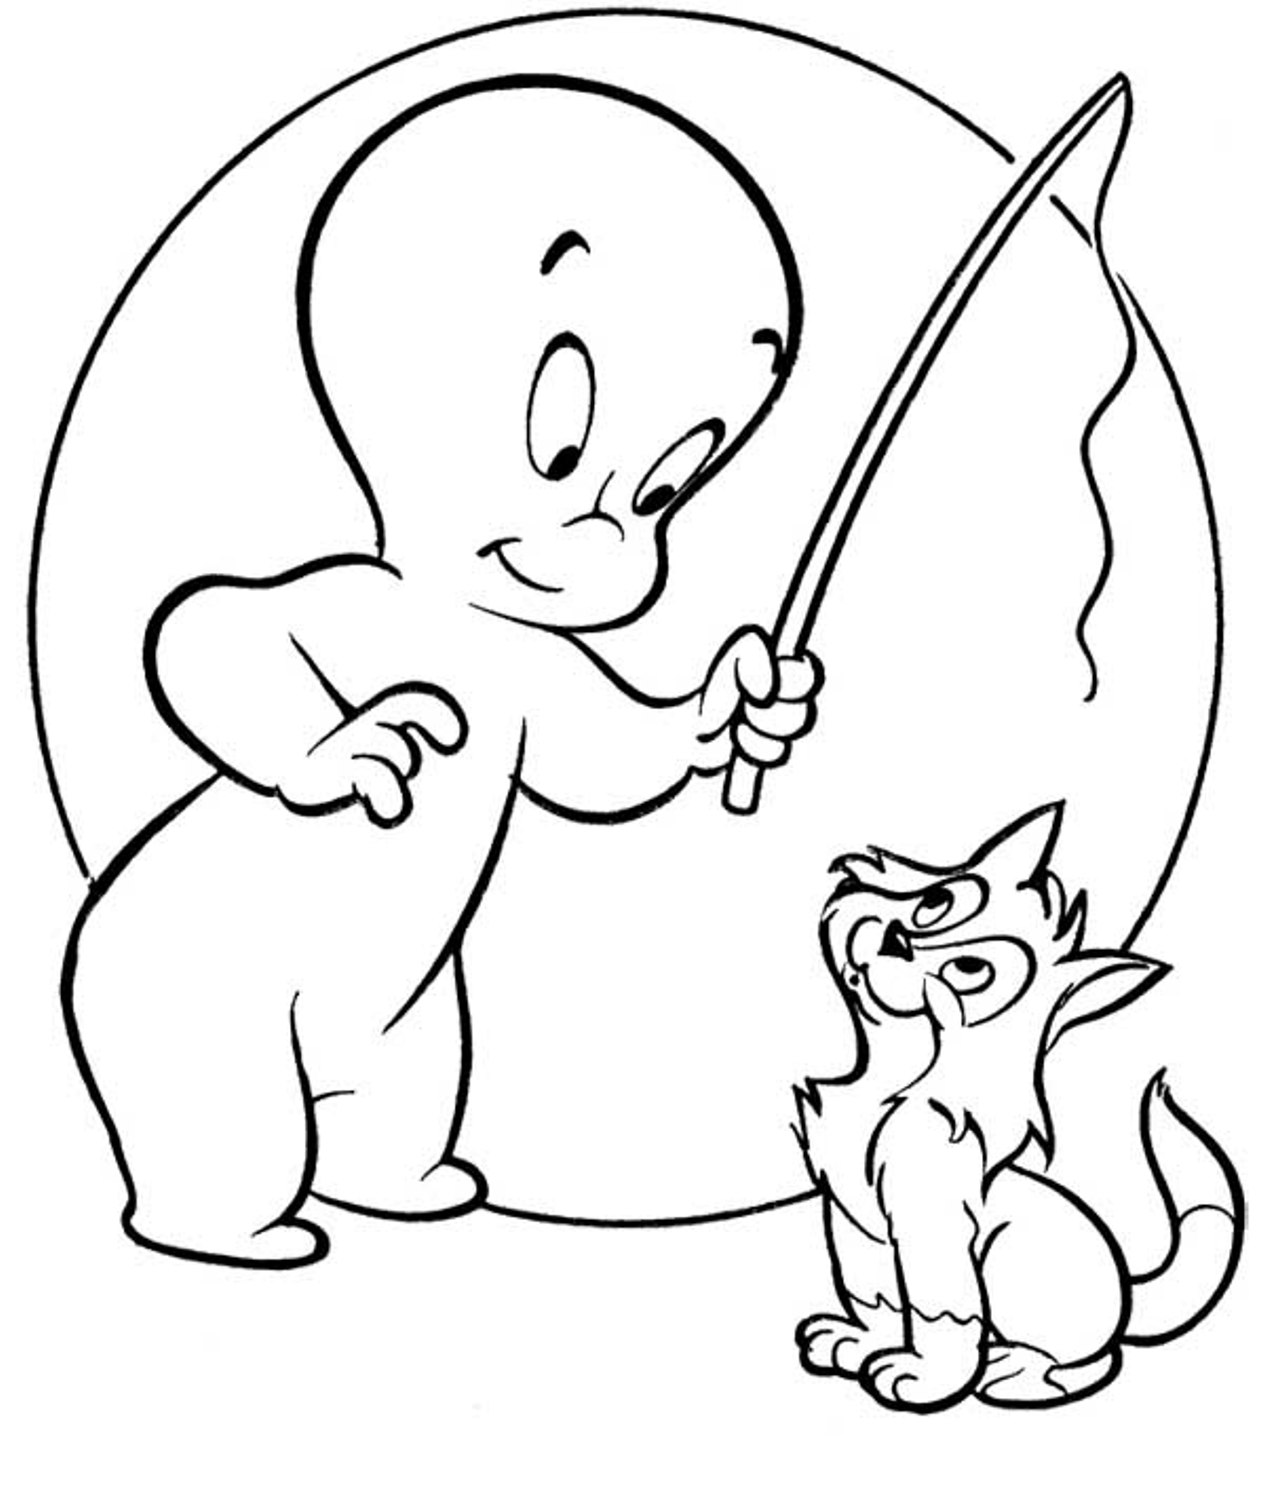 Coloring Pages: Ghosts Coloring Pages and Clip Art Free and Printable